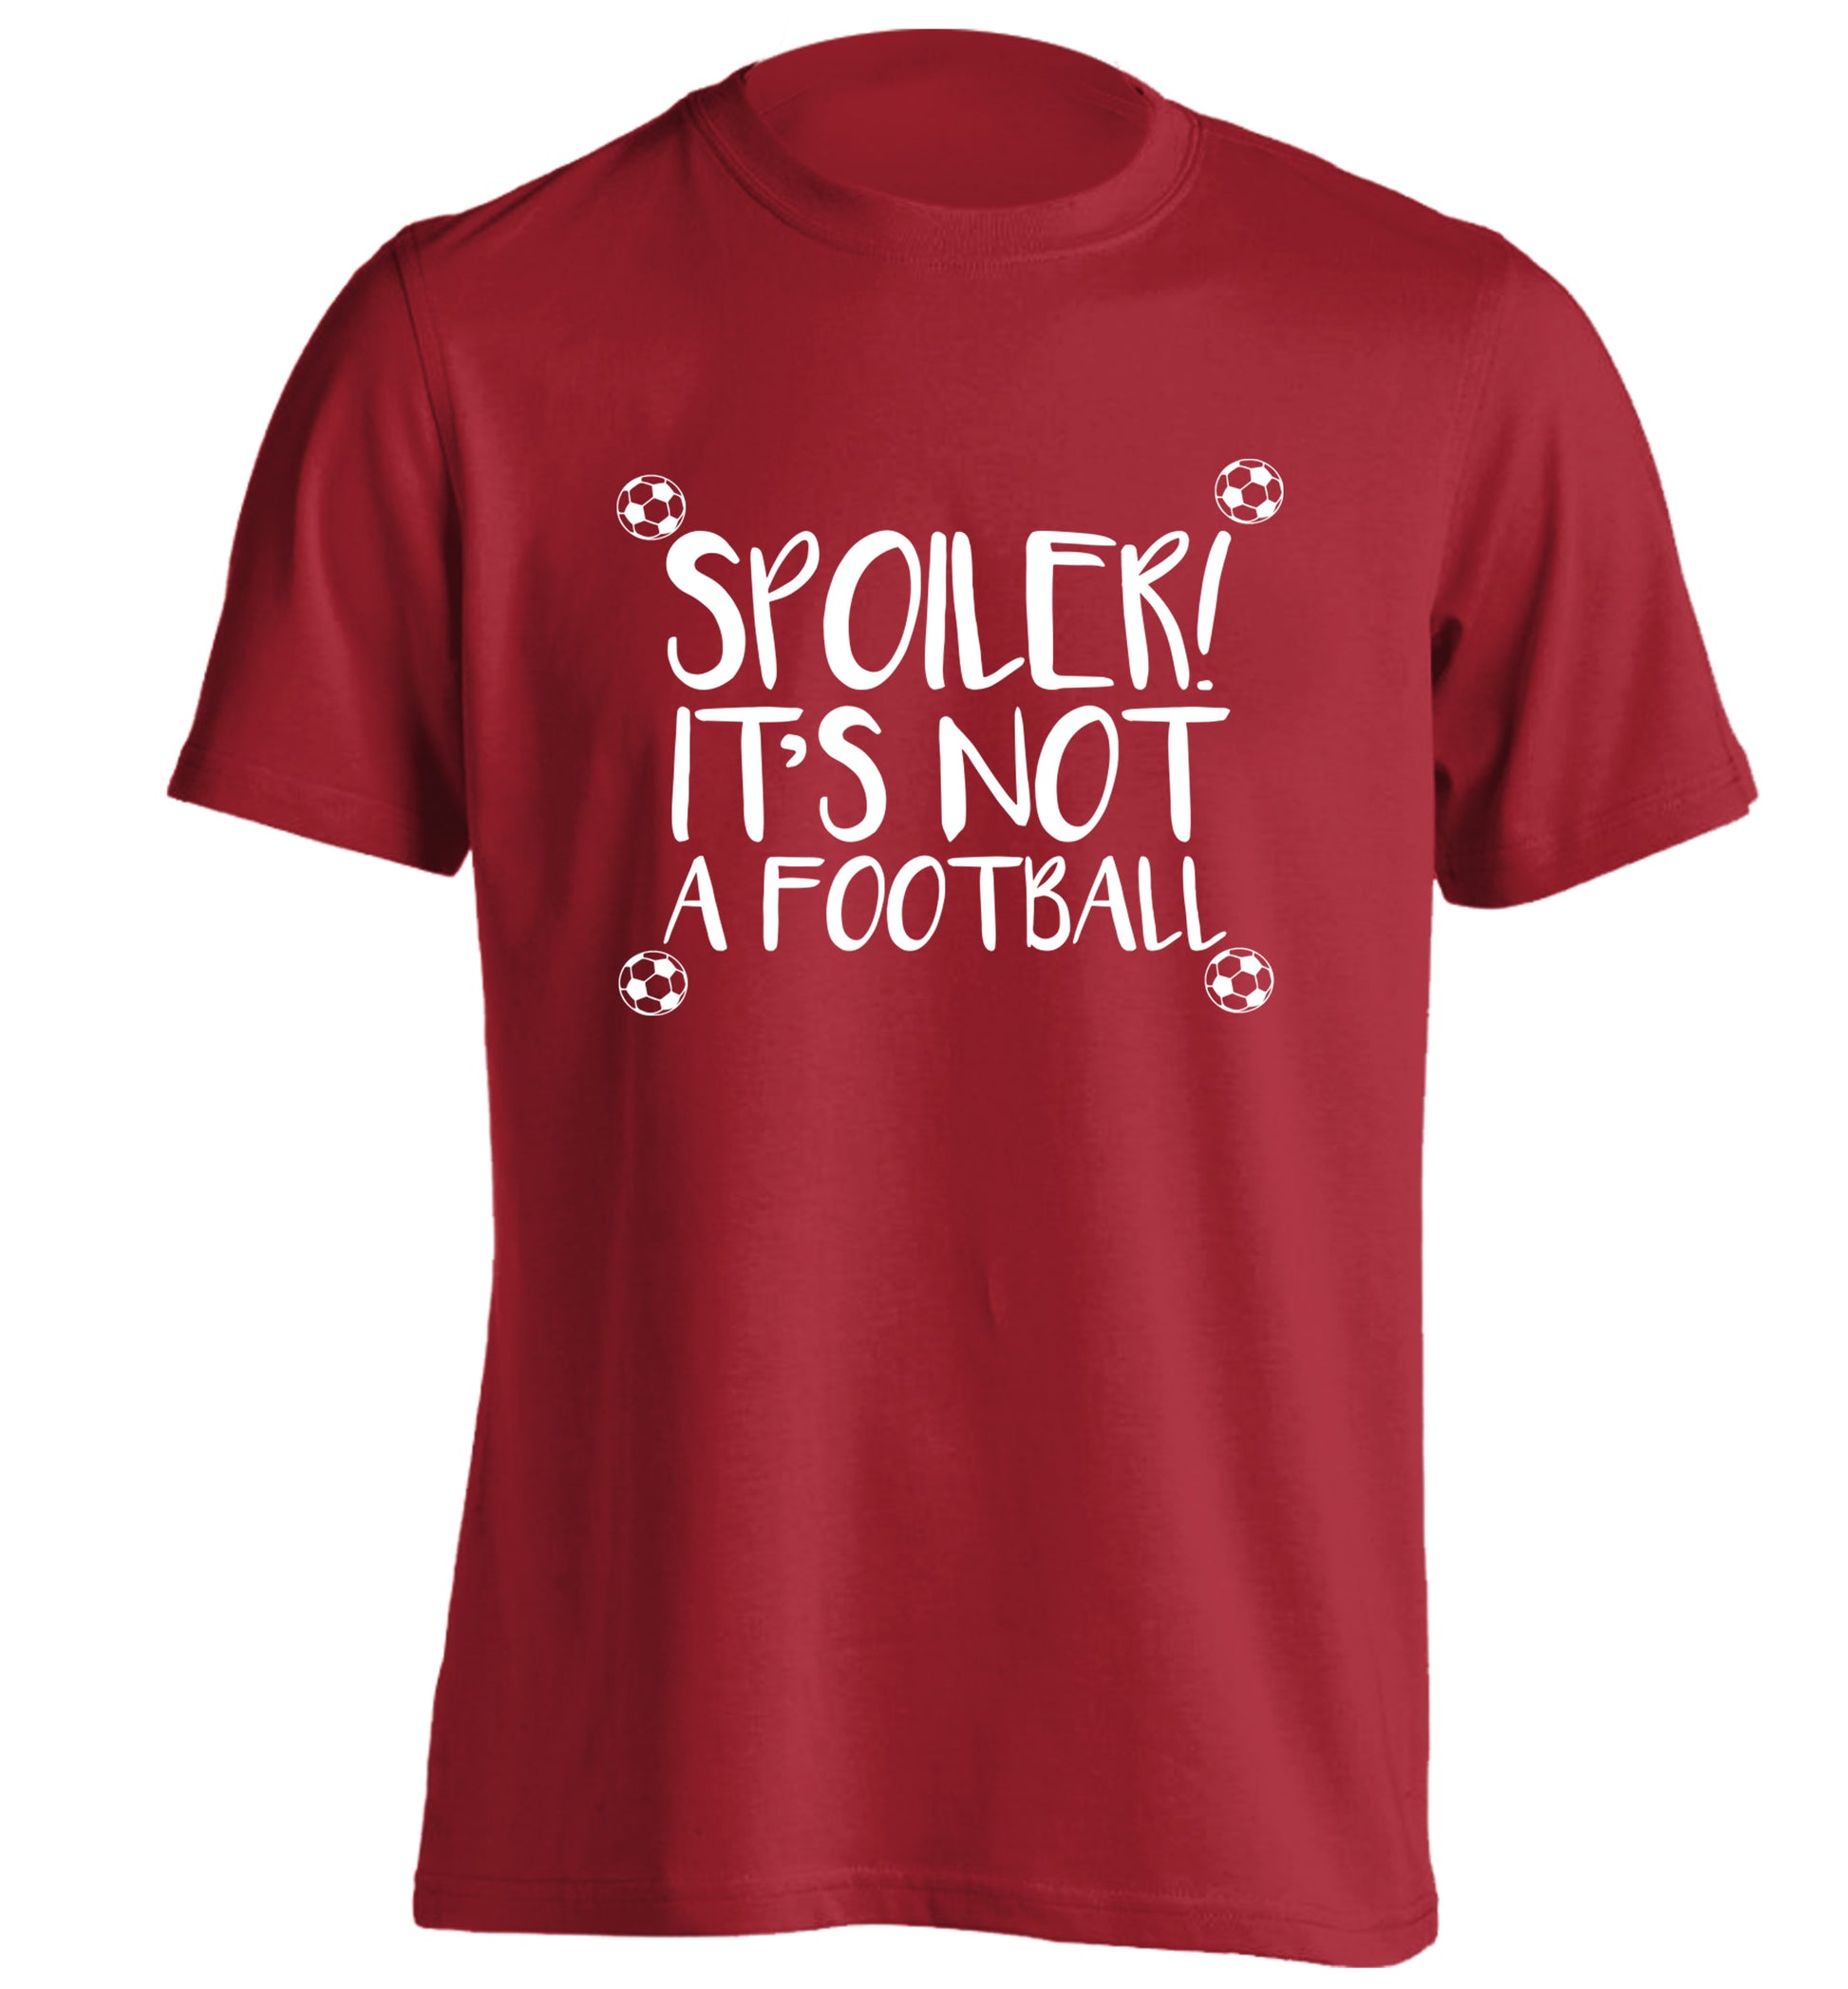 Spoiler it's not a football adults unisex red Tshirt 2XL